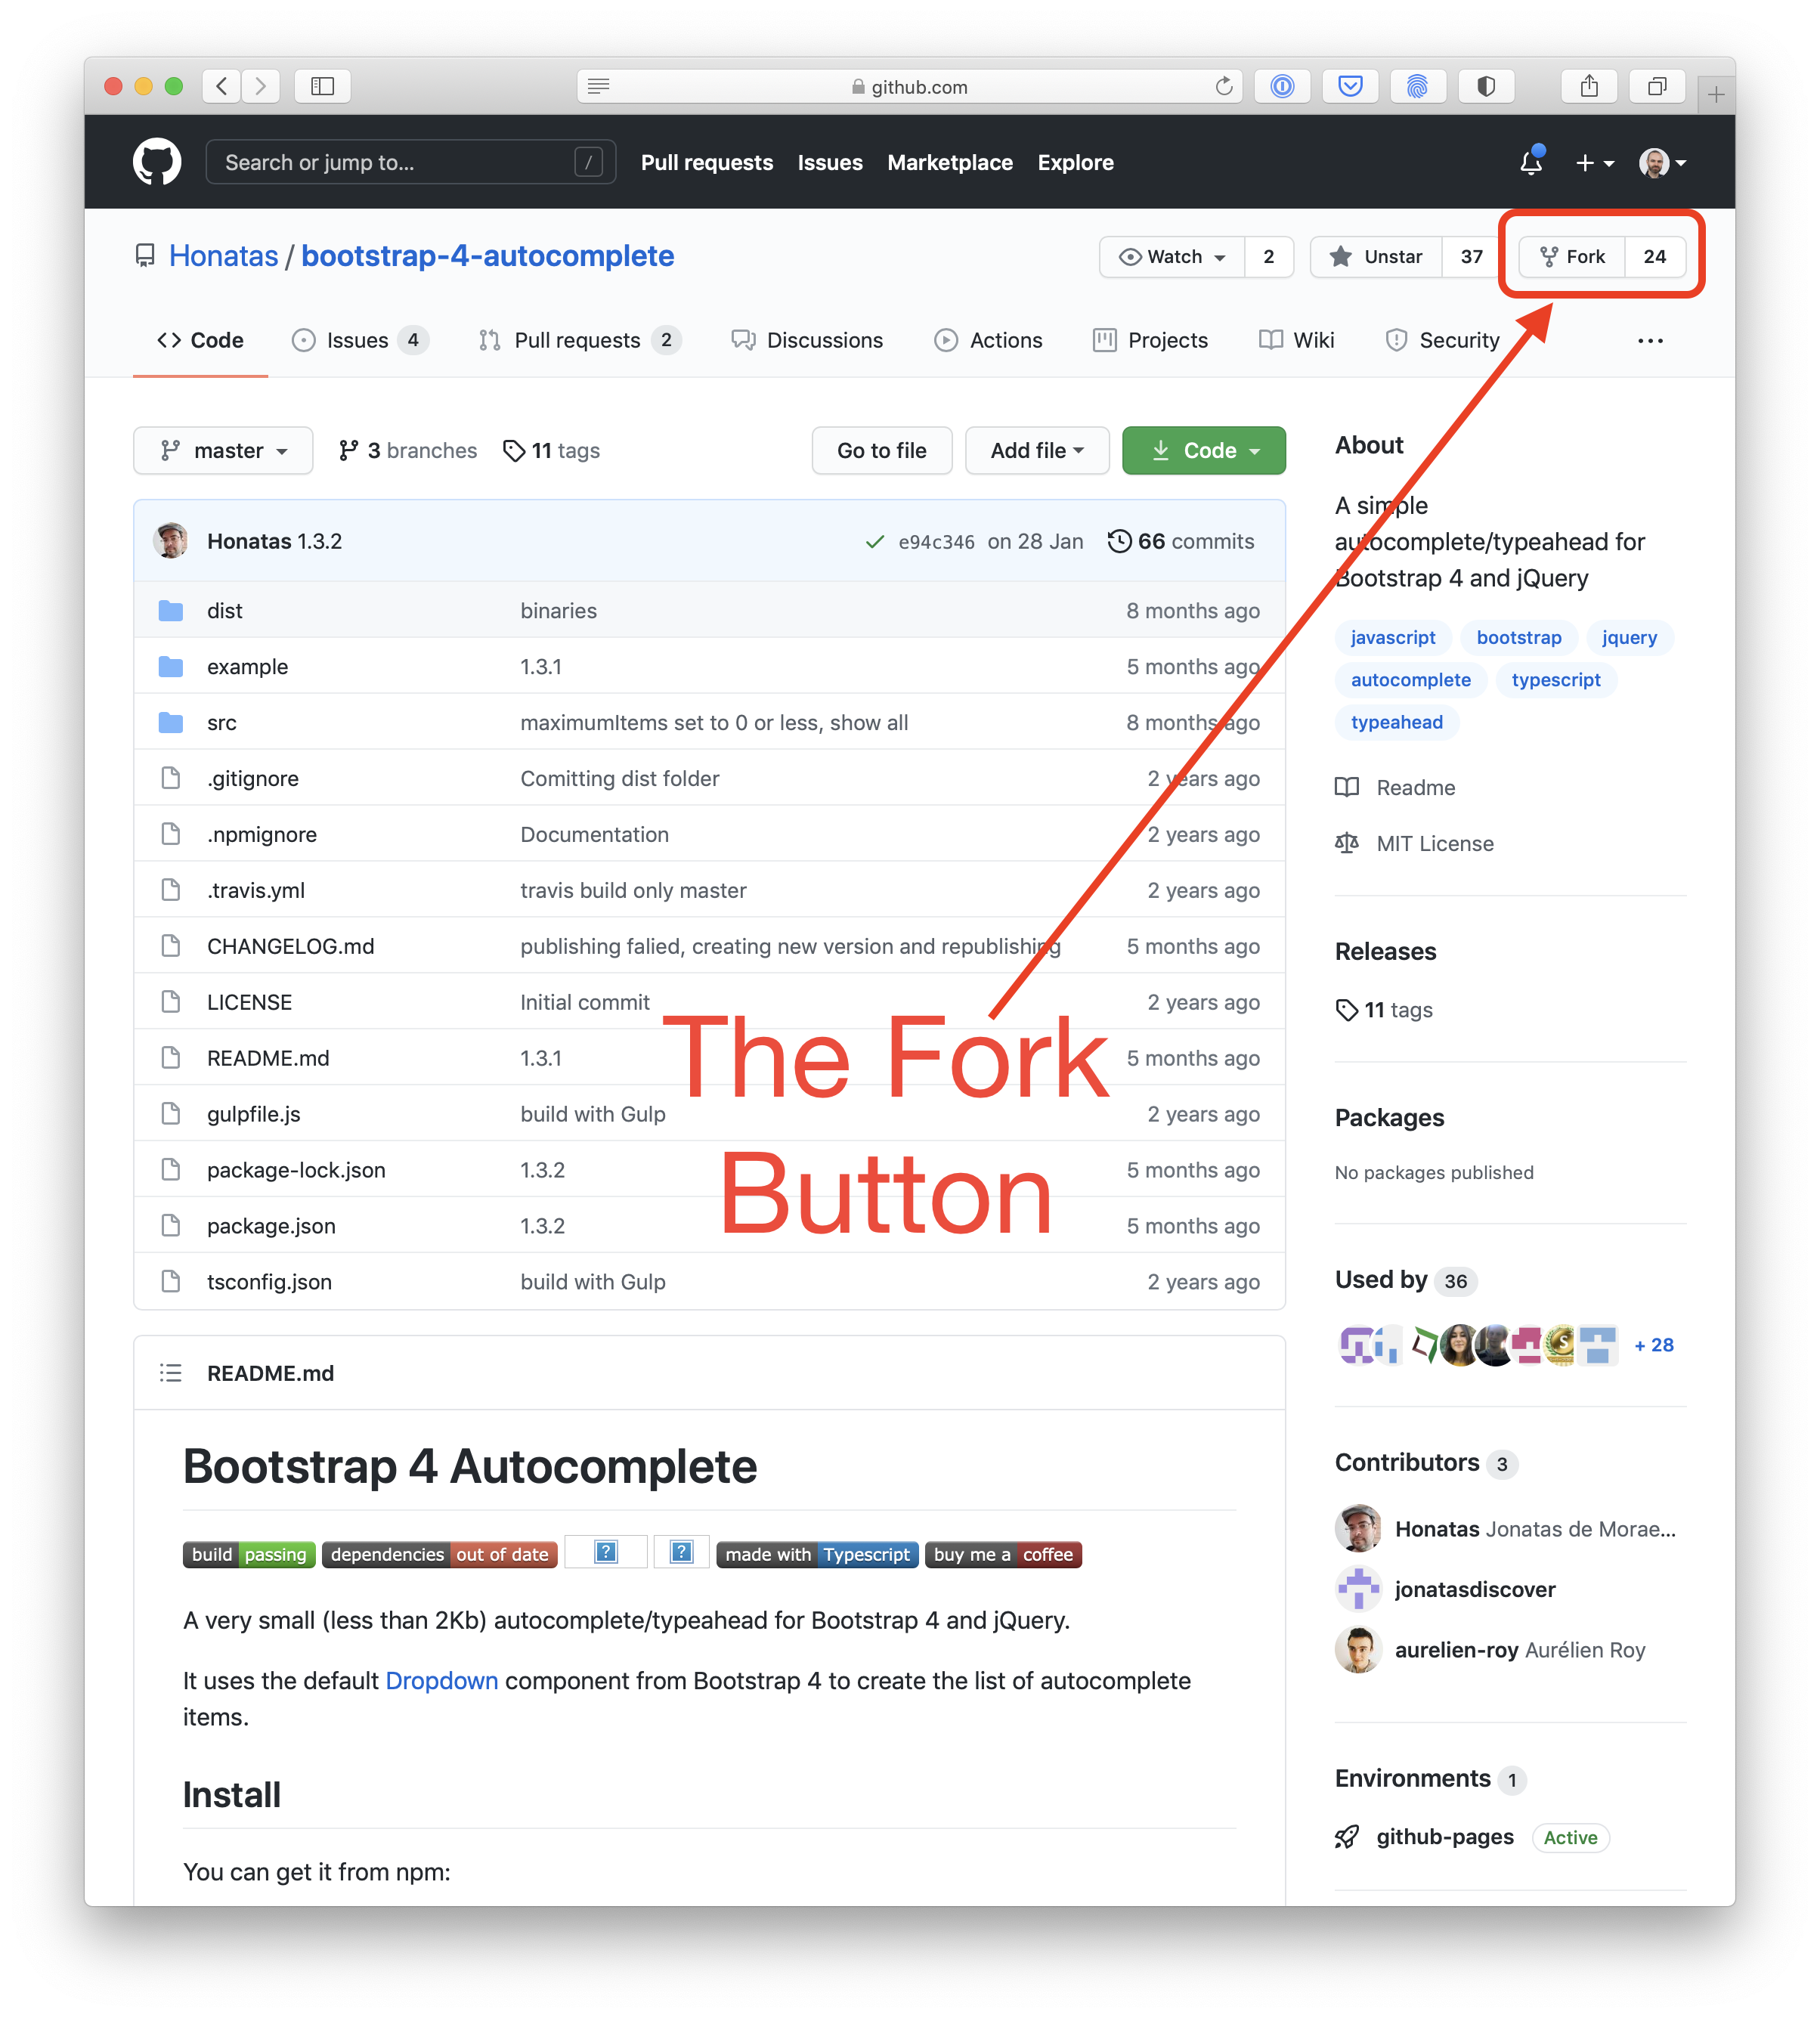 A screenshot showing the 'Fork' button on a repo